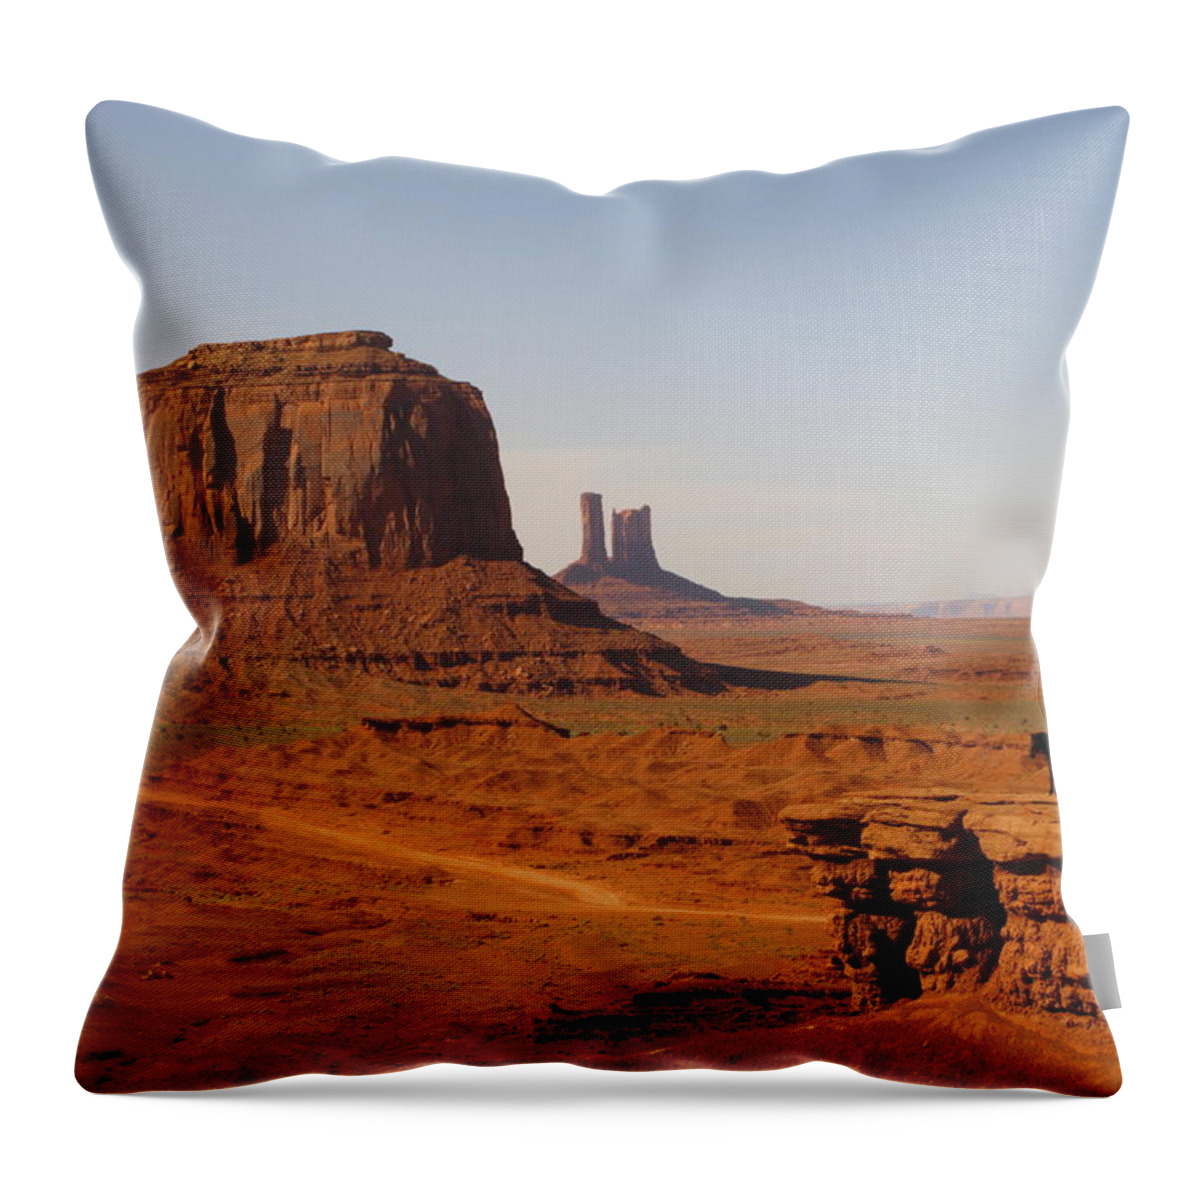 Horse Throw Pillow featuring the photograph Horse Monument Valley Utah Butte Red by Sassy1902